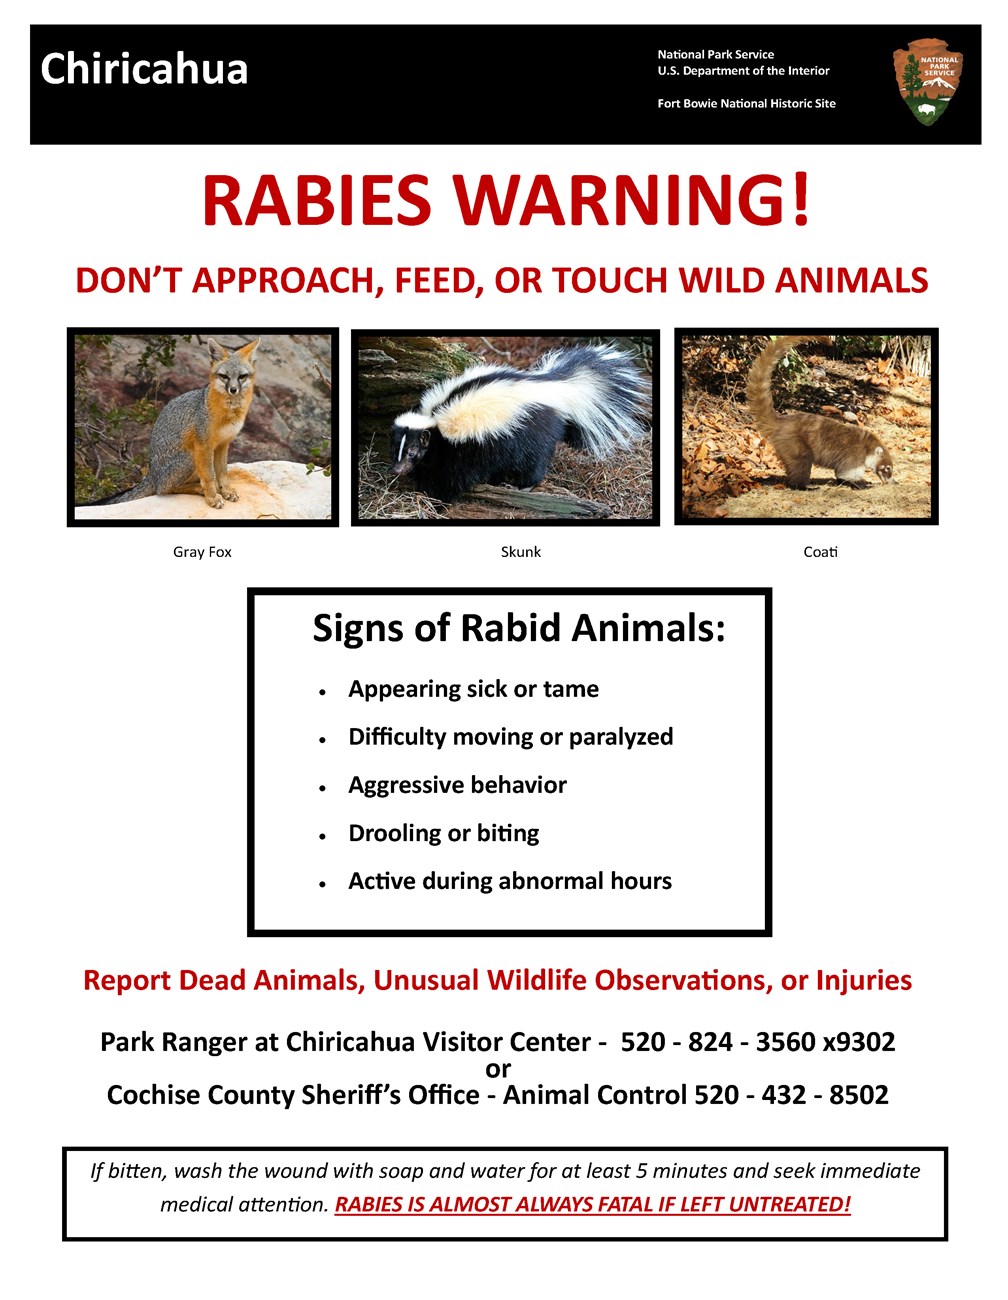 Rabies warning: do not touch, feed, or approach wild animals